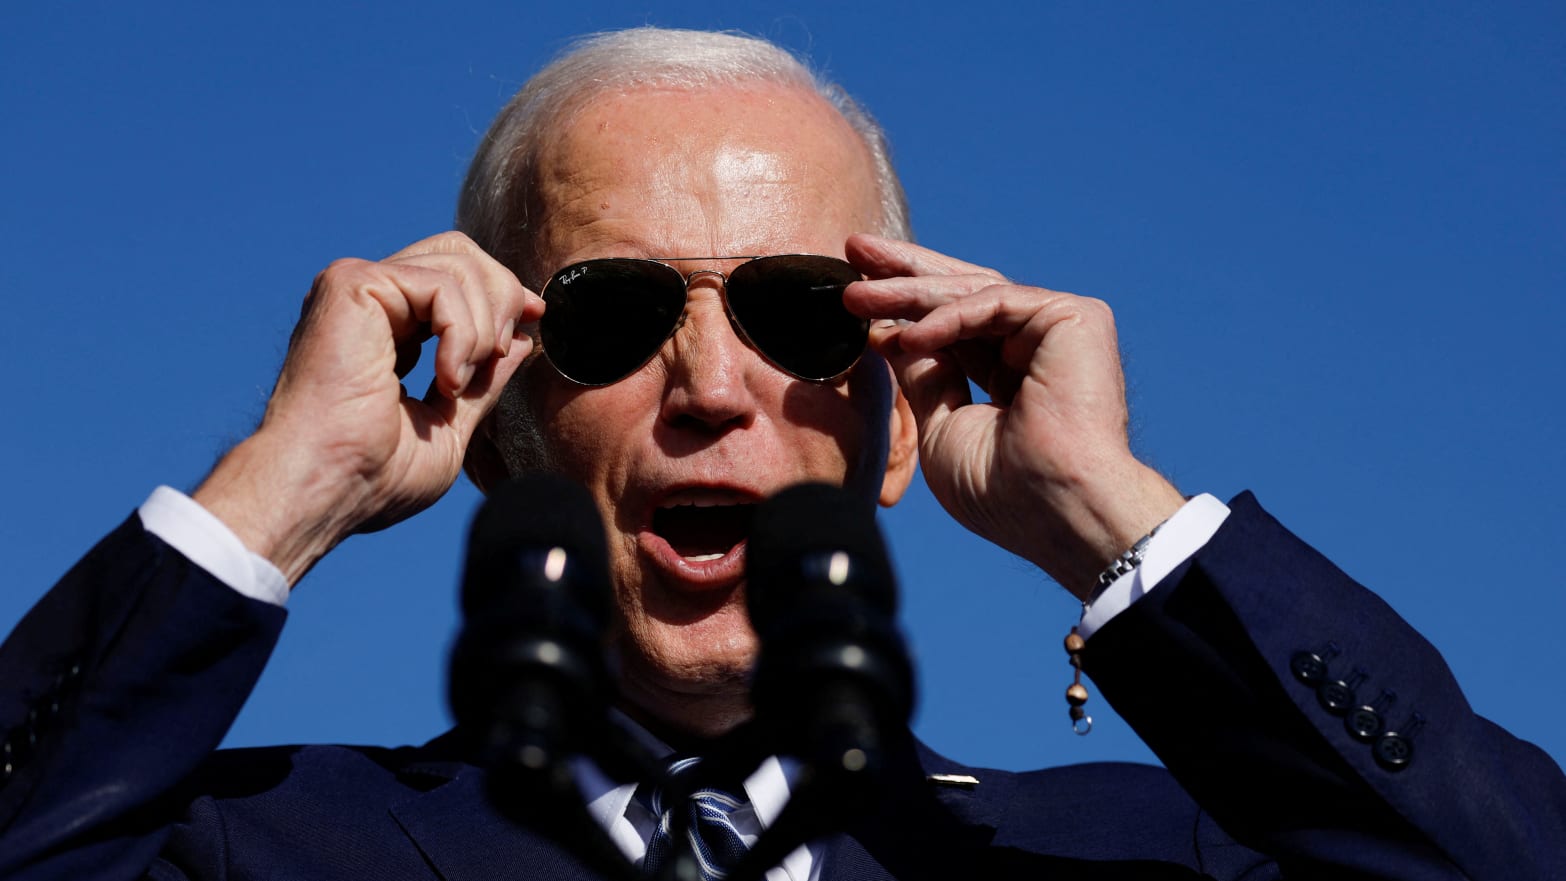 President Joe Biden’s campaign raised $127 million in June, its best month yet, including $38 million which was raised in the wake of his disastrous debate against Donald Trump.